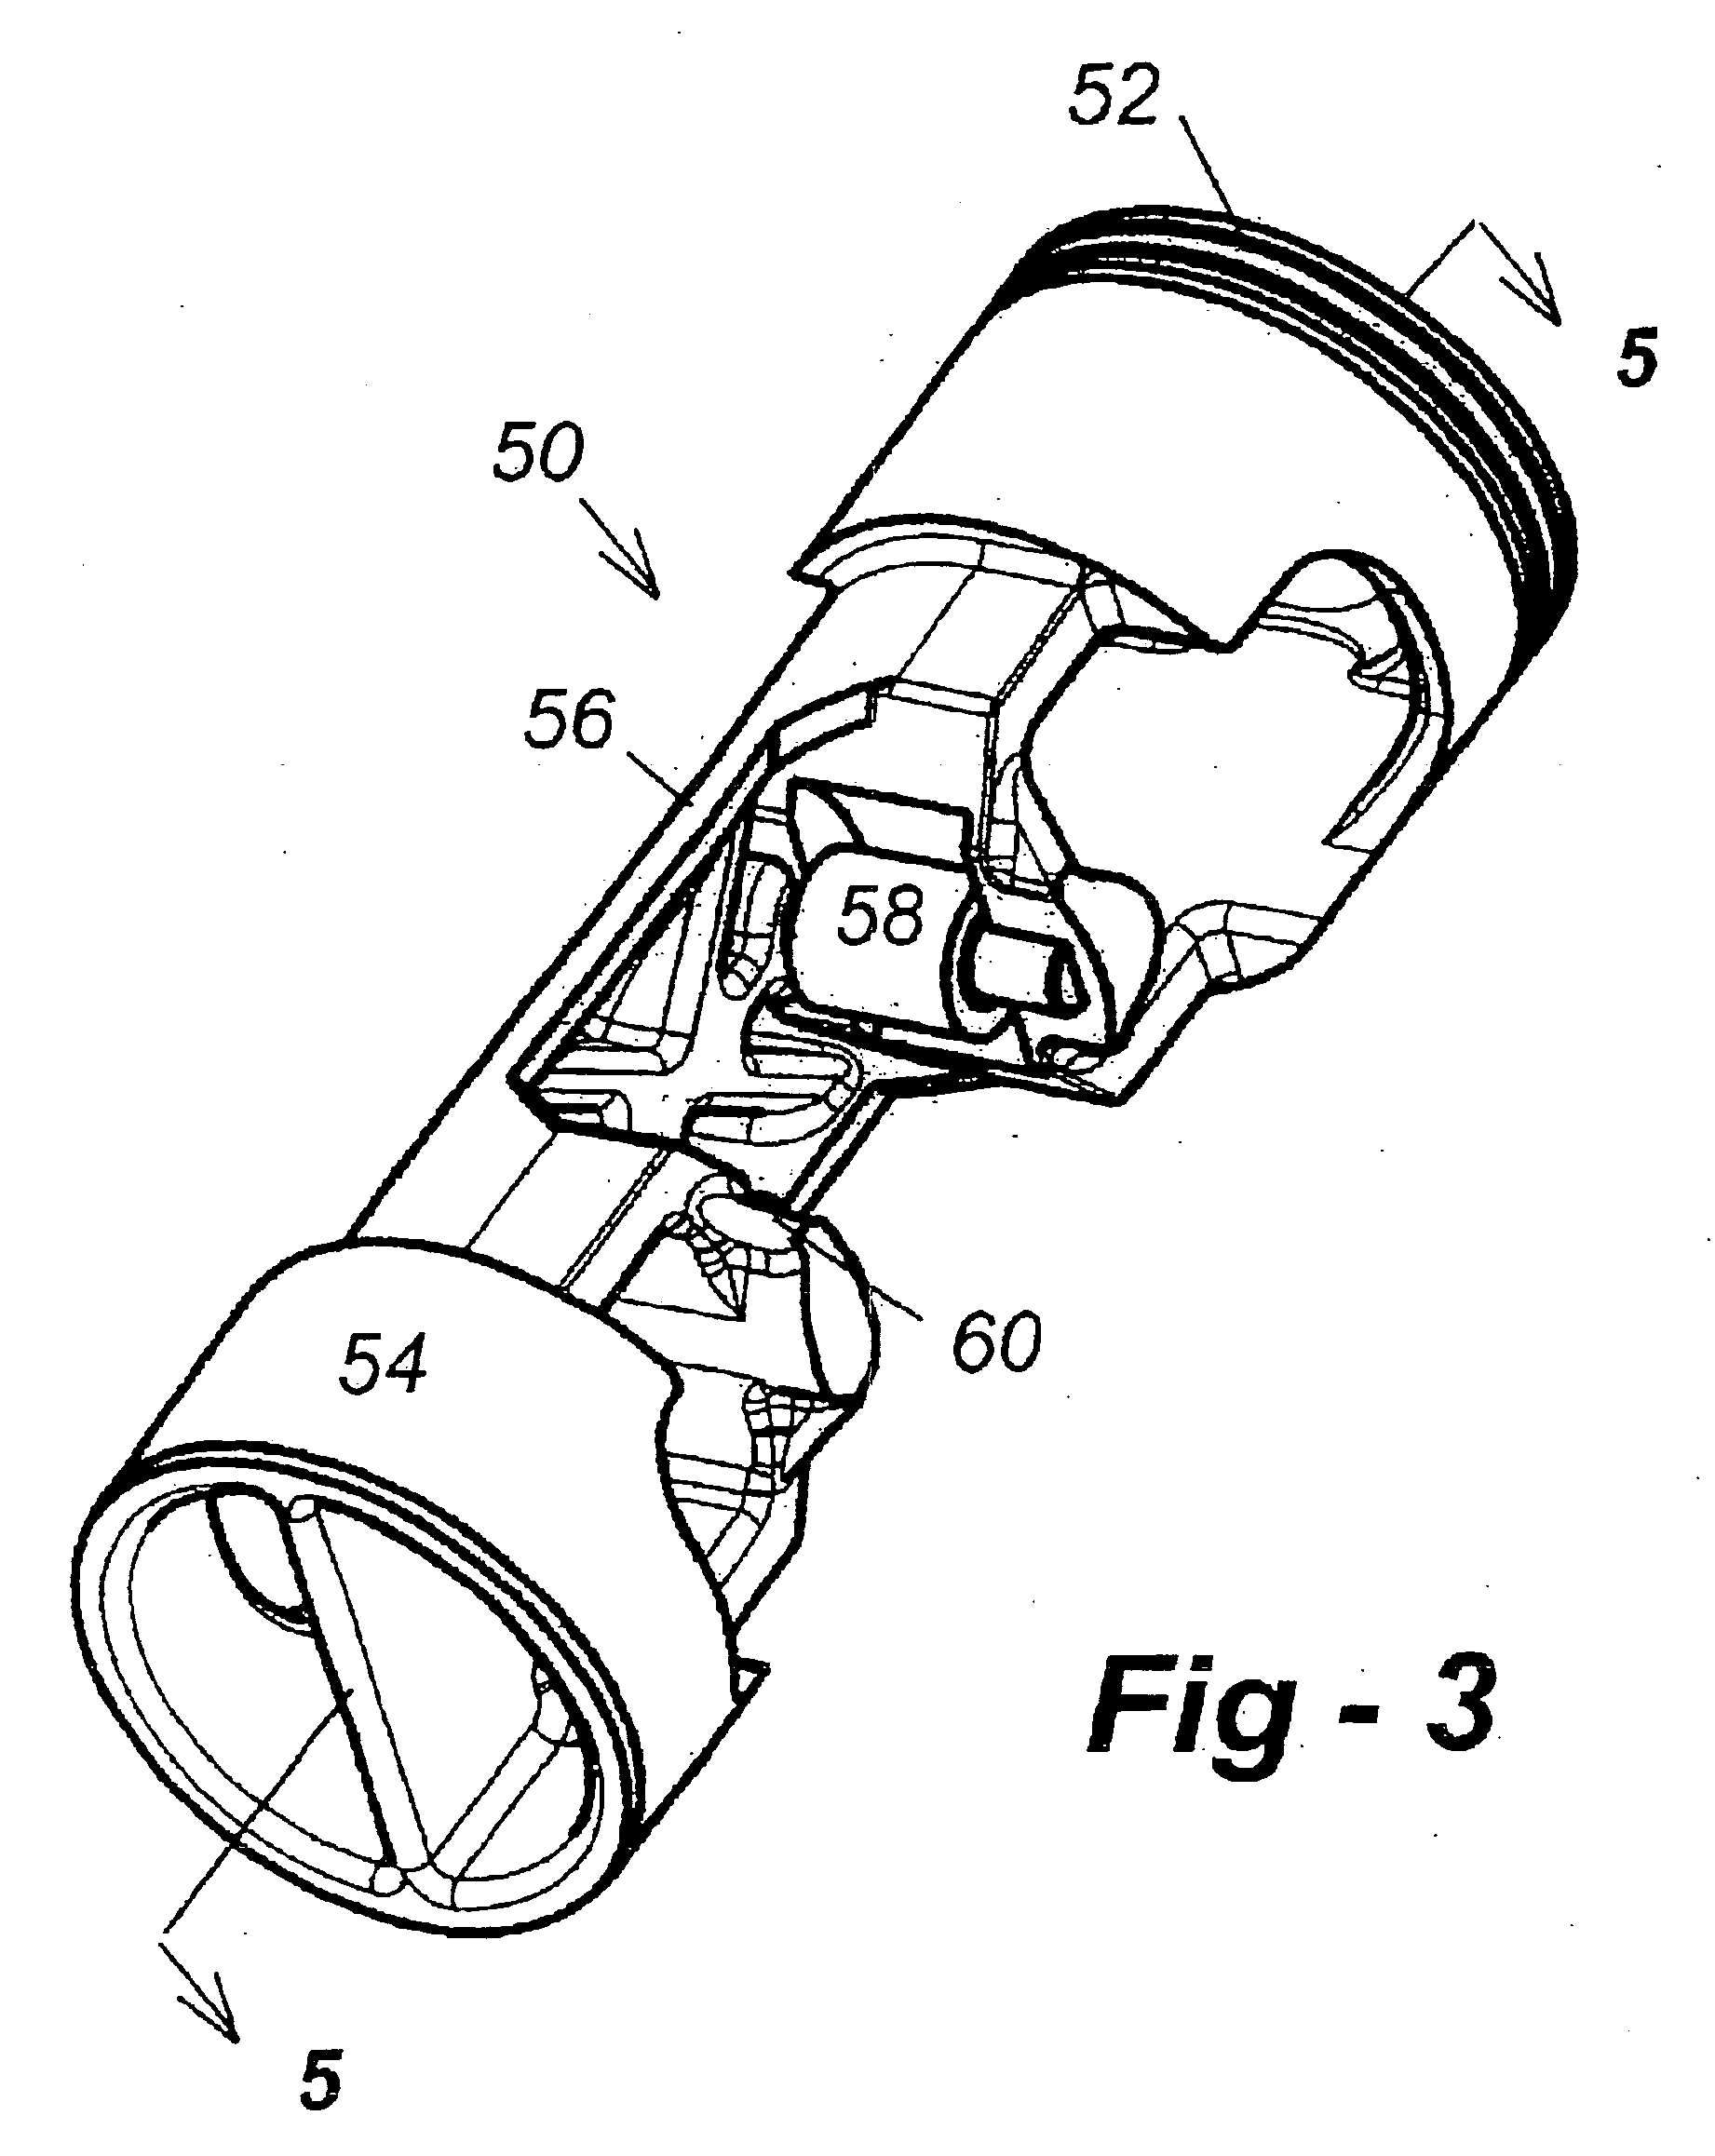 Single-ended barrel engine with double-ended, double roller pistons